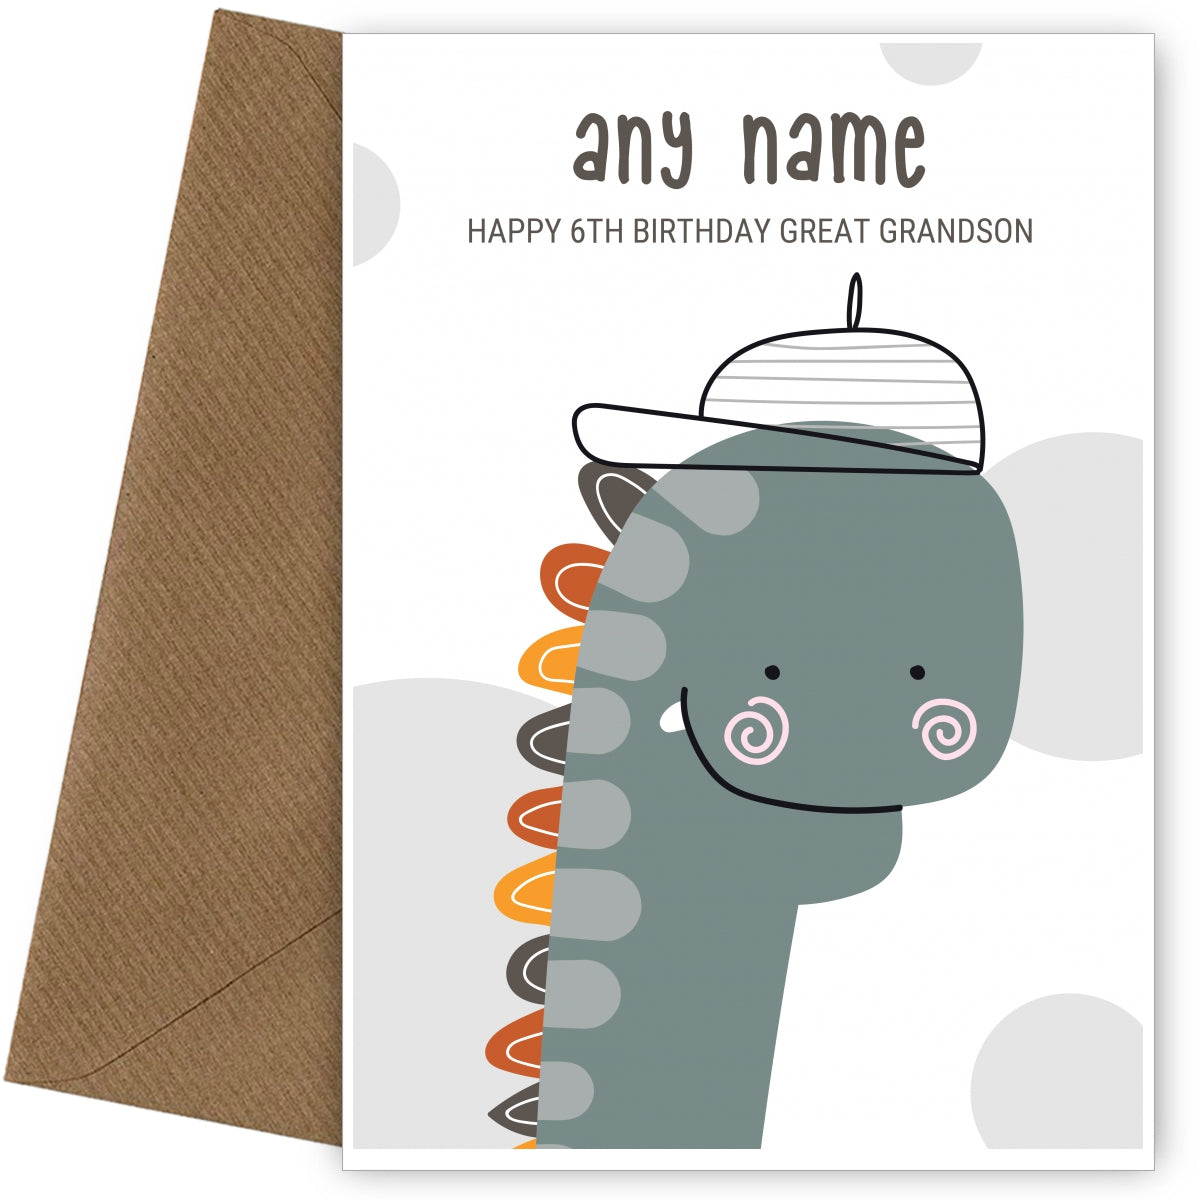 Happy 6th Birthday Card for Great Grandson - Dinosaur with Cap